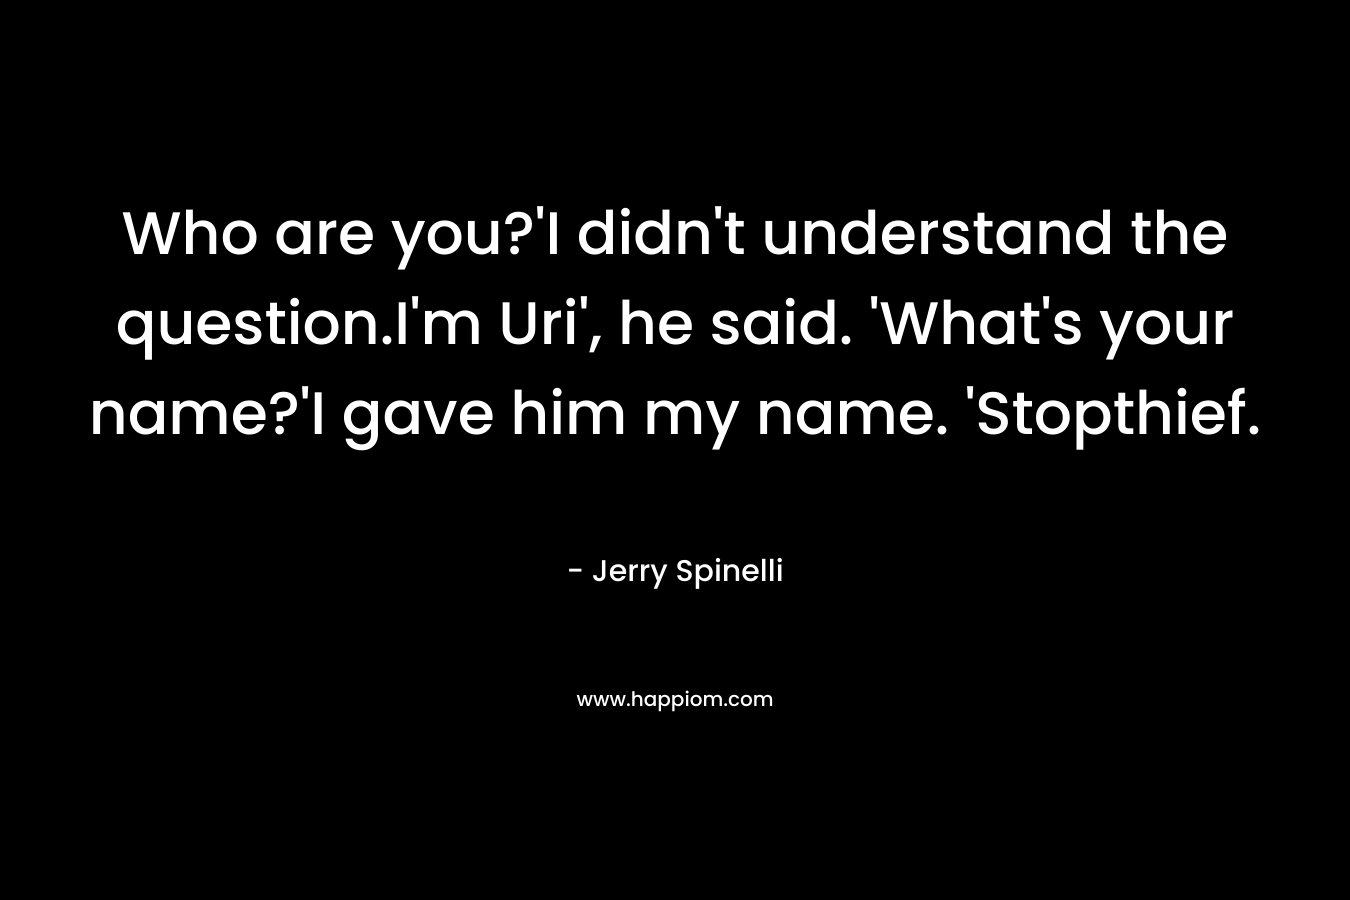 Who are you?’I didn’t understand the question.I’m Uri’, he said. ‘What’s your name?’I gave him my name. ‘Stopthief. – Jerry Spinelli